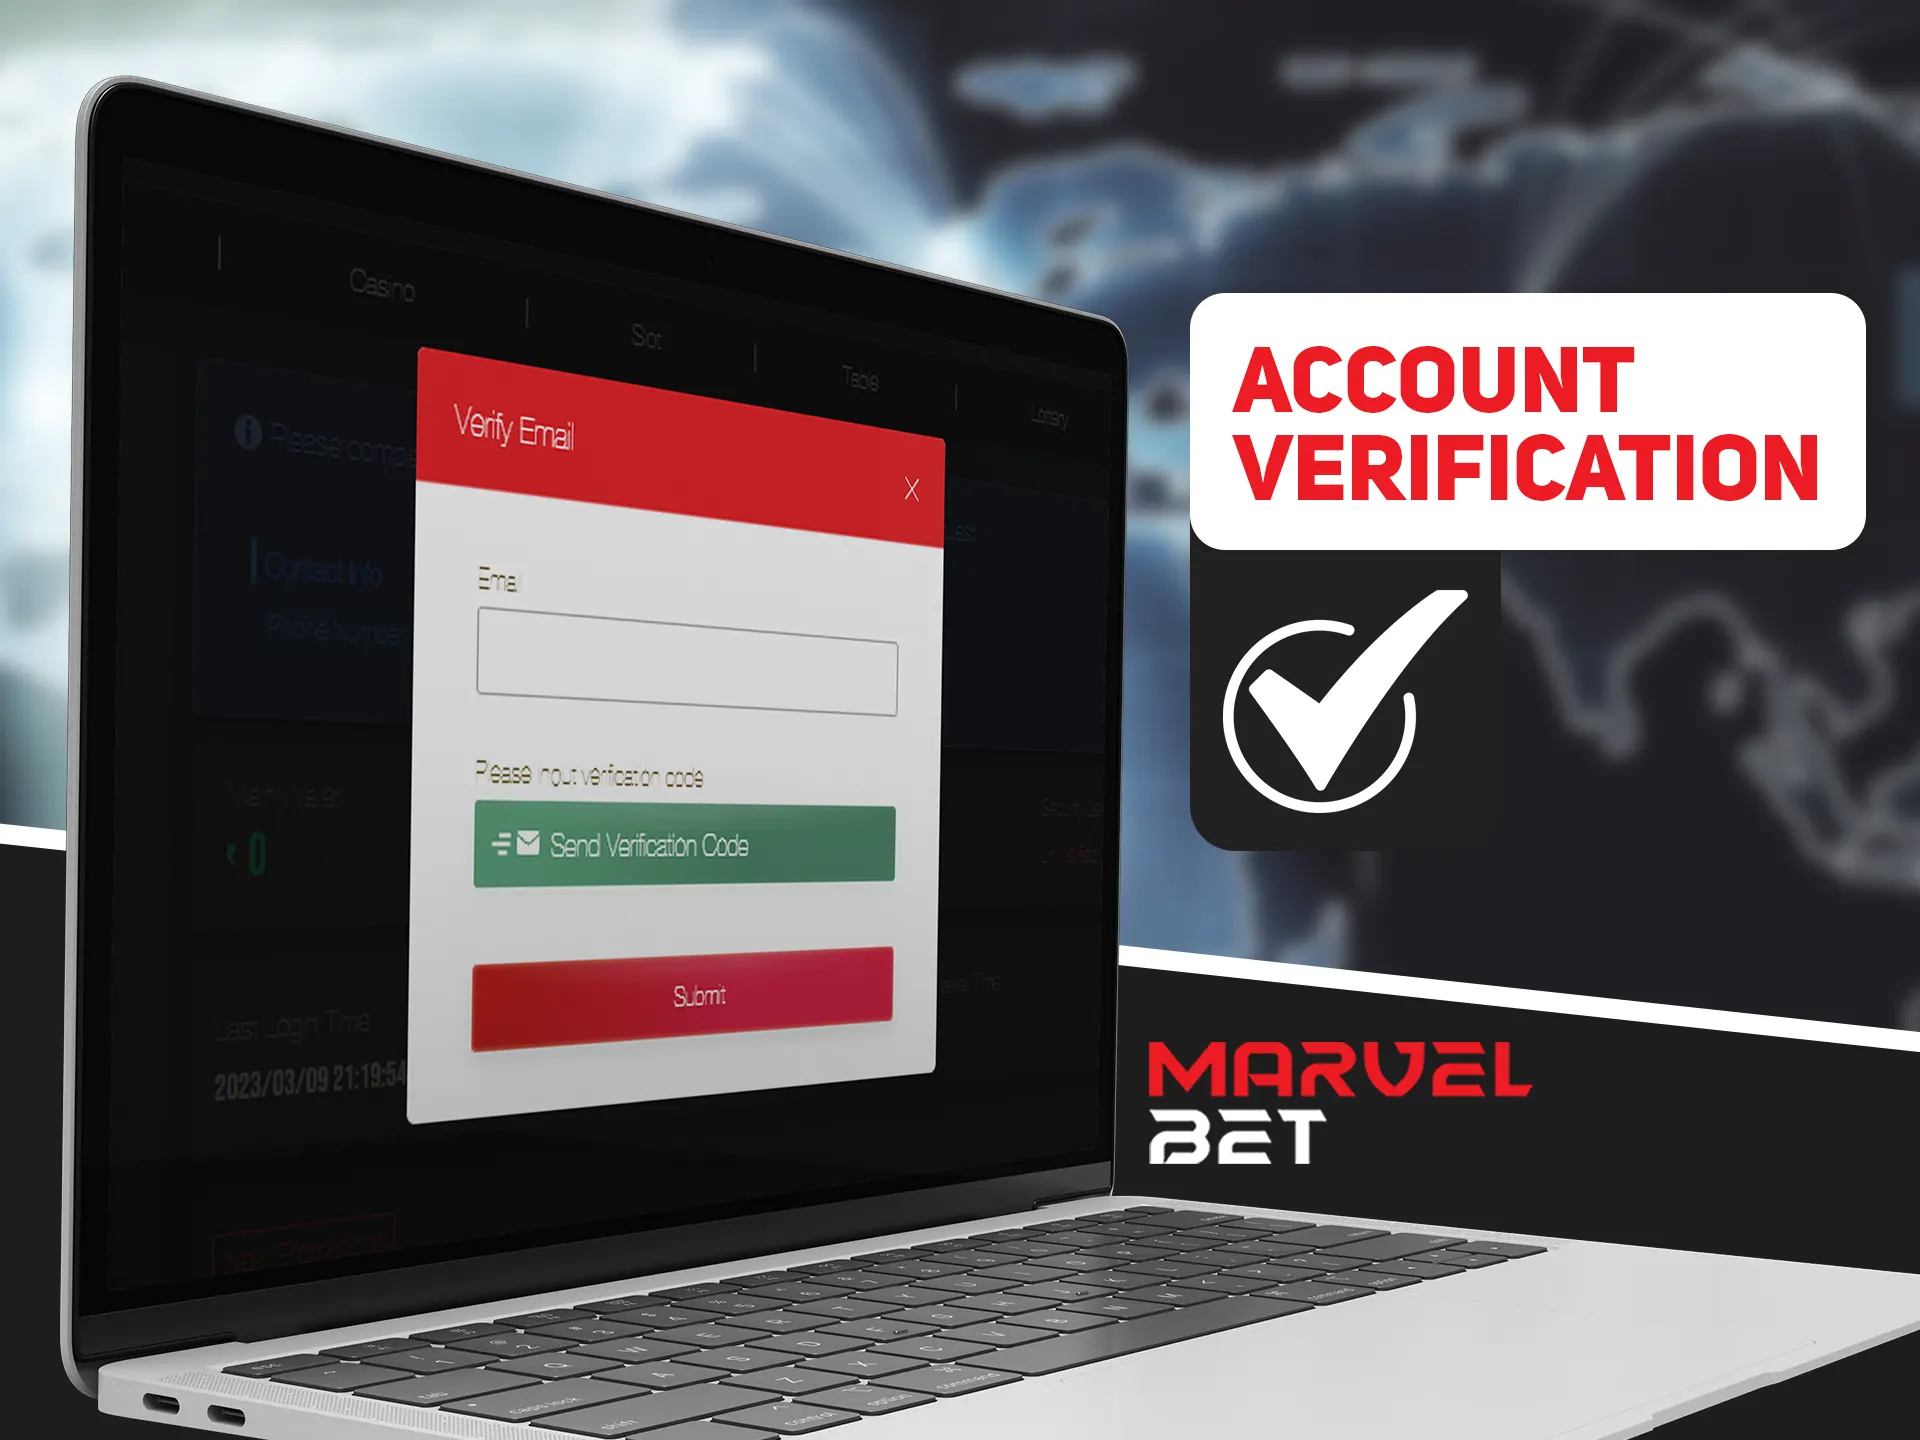 Verify your Marvelbet account for ulocking new features.